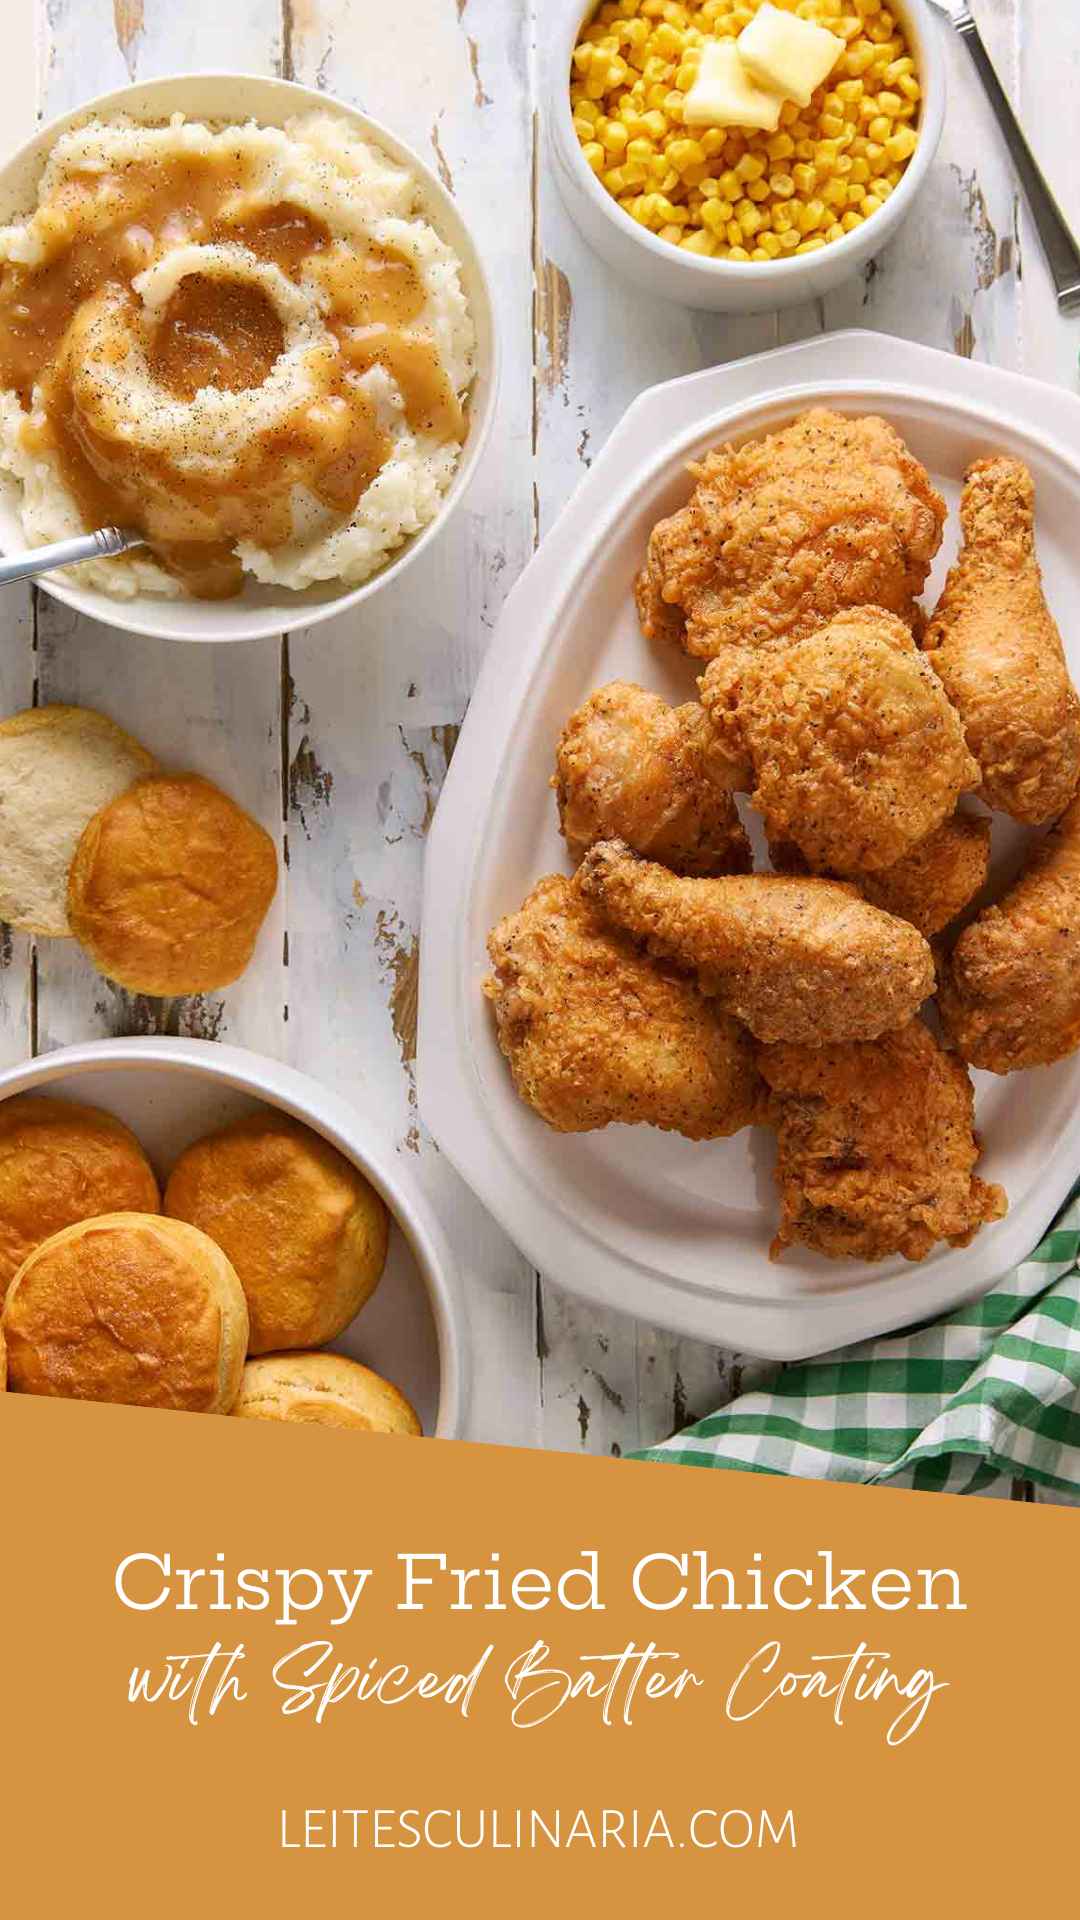 Pieces of batter-fried chicken piled on a white platter, along with biscuits, mashed potatoes, and buttered corn.